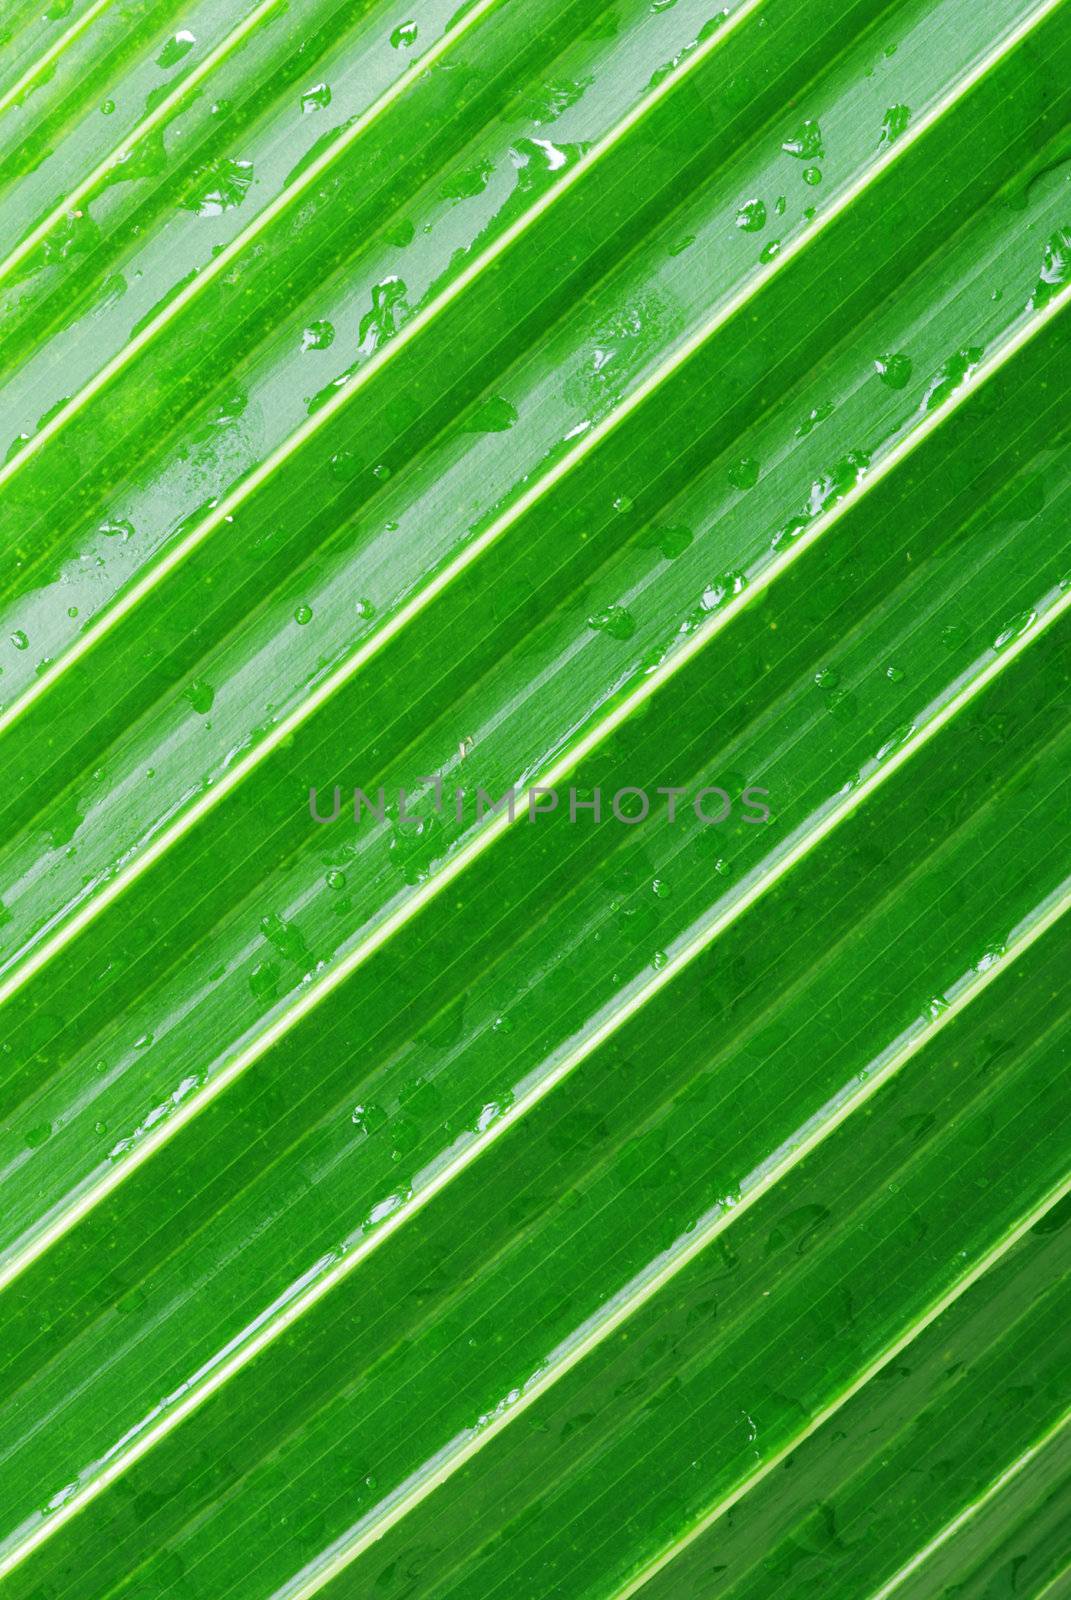 Macro of a green palm leaf with diagonal pattern and dew drops